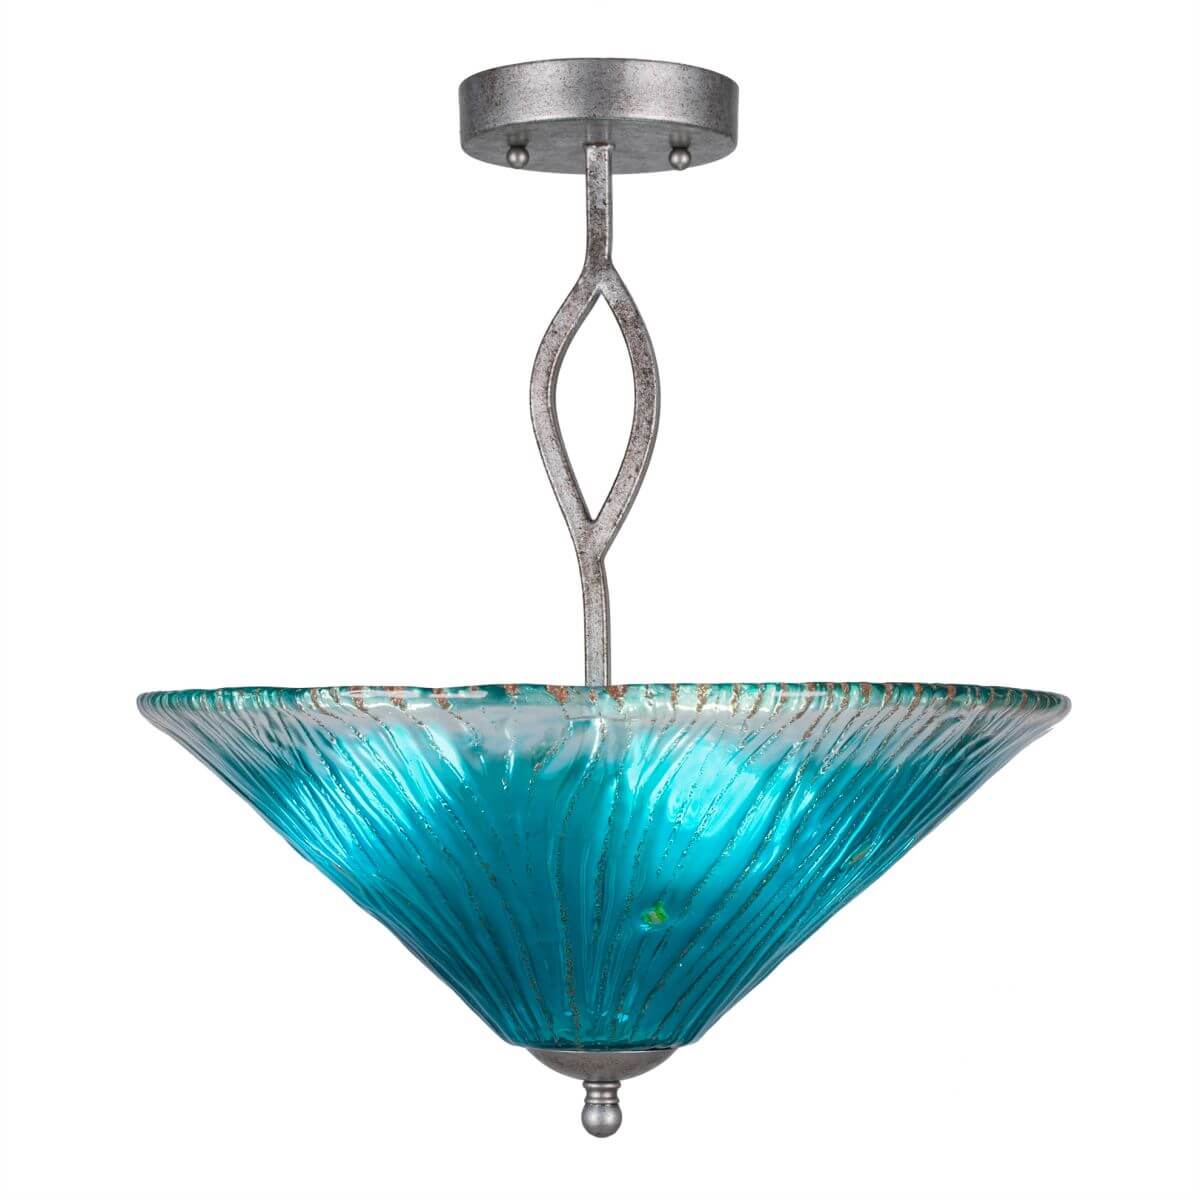 Toltec Lighting 242-AS-715 Revo 3 Light 16 inch Semi-Flush Mount in Aged Silver with 16 inch Teal Crystal Glass